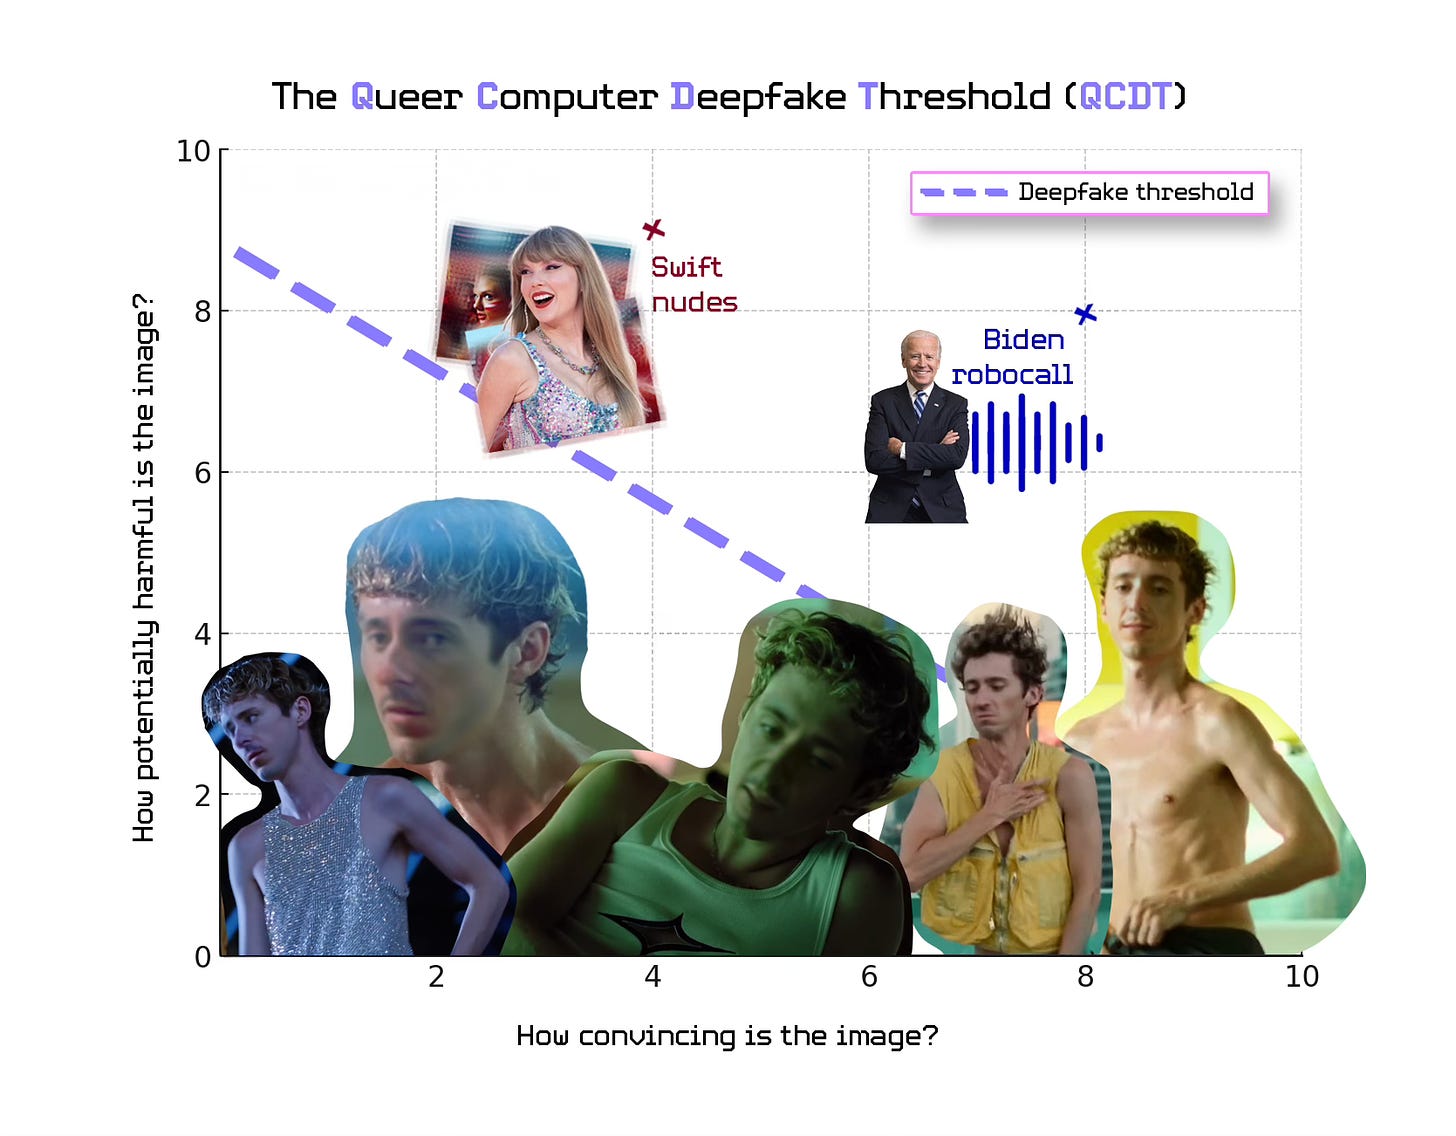 A graph titled 'The Queer Computer Deepfake Threshold (QCDT)' features two axes: 'How convincing is the image?' on the x-axis, ranging from 0 to 10, and 'How potentially harmful is the image?' on the y-axis, ranging from 0 to 10. A dashed line labeled 'Deepfake threshold' diagonally divides the graph. Various images are plotted on the graph. Notably, at the bottom is a collage of deepfake images of the user as Troye Sivan in different poses and outfits, with convincing scores increasing from left to right. At the upper part of the graph, 'Swift nudes' is marked by an icon of Taylor Swift with a background image, and 'Biden robocall' depicts a smiling Joe Biden with blue sound waves, both plotted as more potentially harmful.